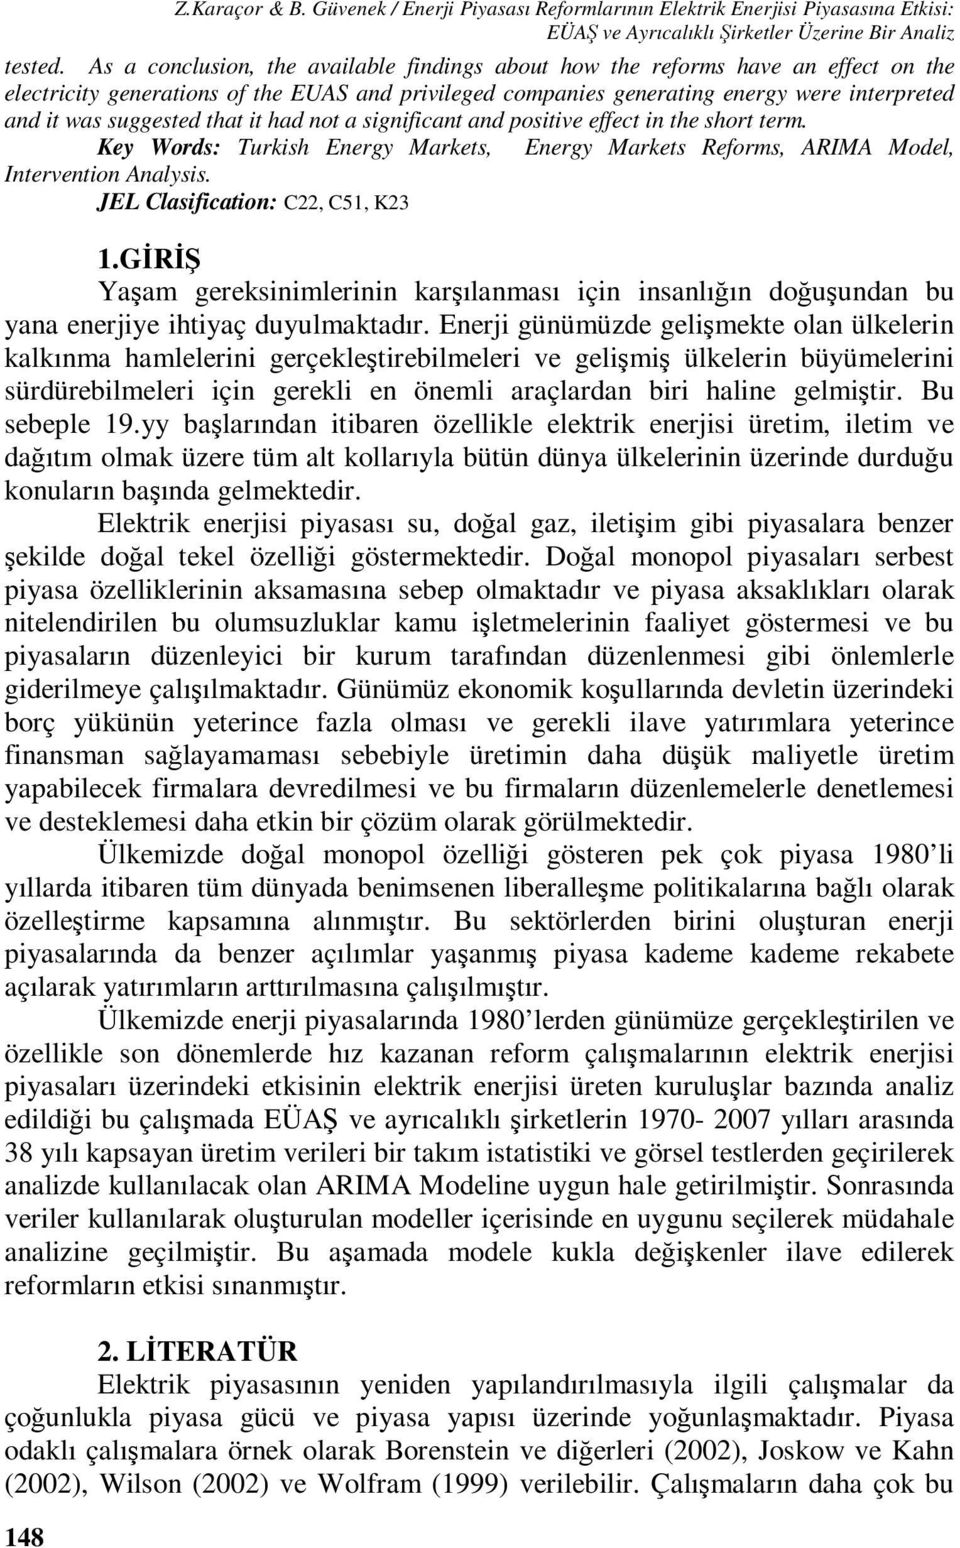 a significan and posiive effec in he shor erm. Key Words: Turkish Energy Markes, Energy Markes Reforms, ARIMA Model, Inervenion Analysis. JEL Clasificaion: C22, C51, K23 1.